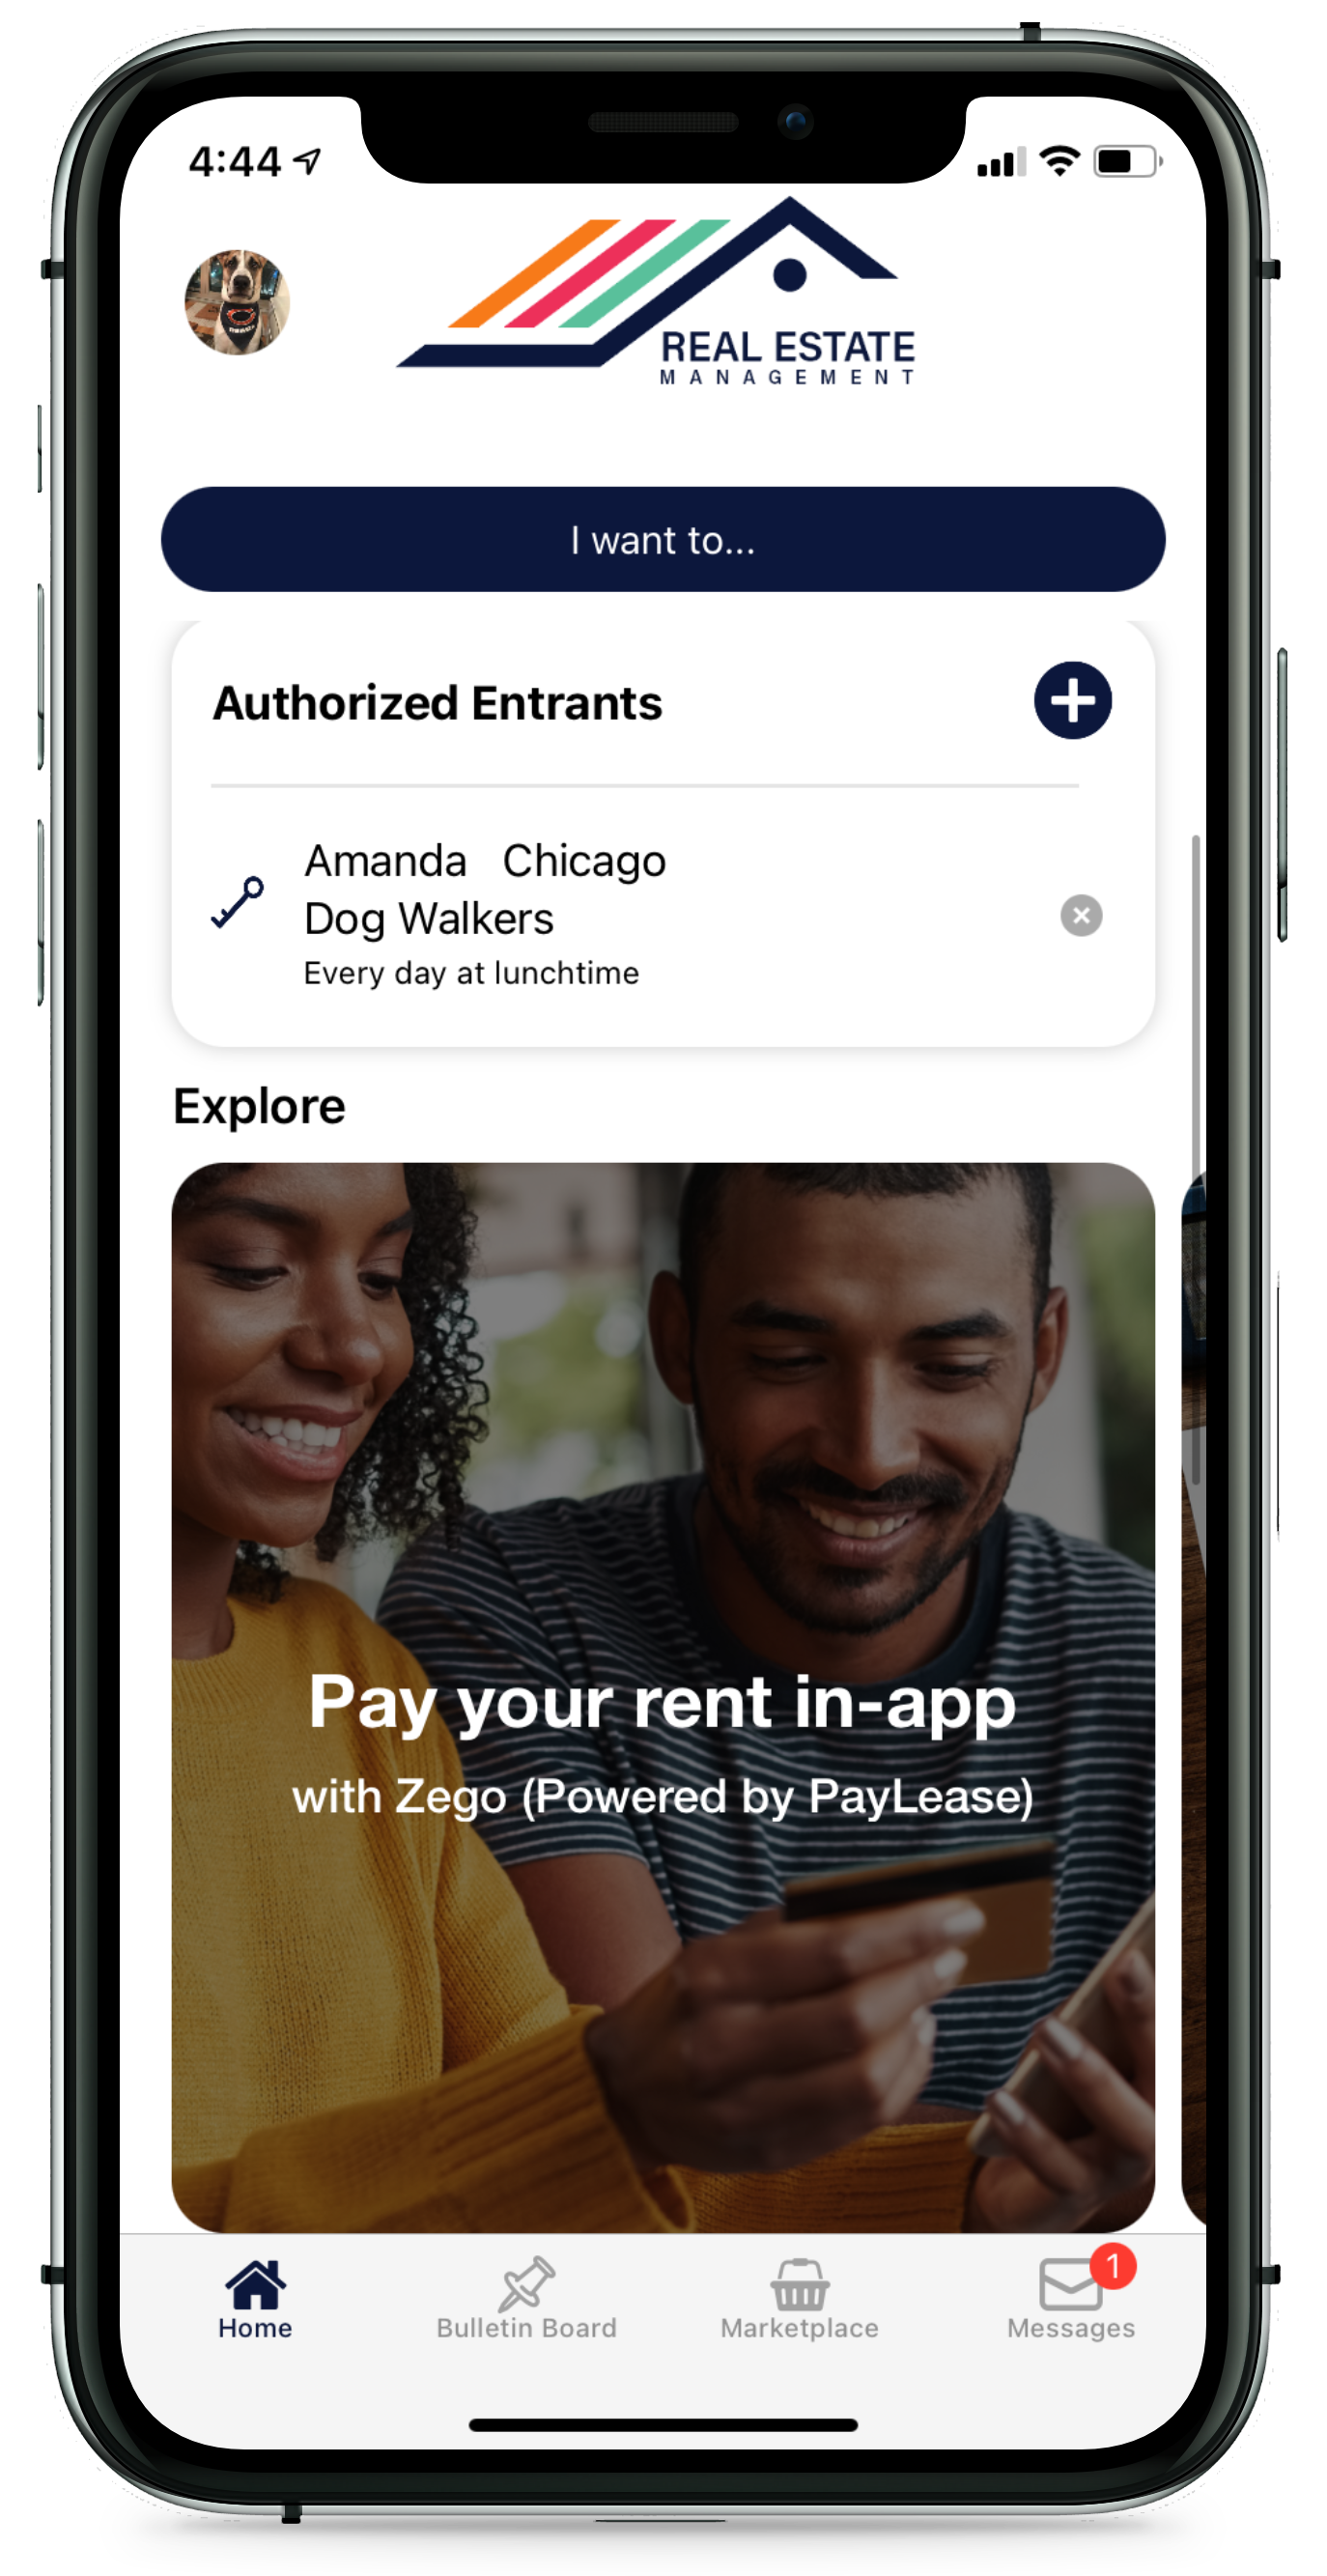 With Zego Mobile Doorman, benefit from a fully customized app that reflects the unique branding of your property or special needs of a full portfolio